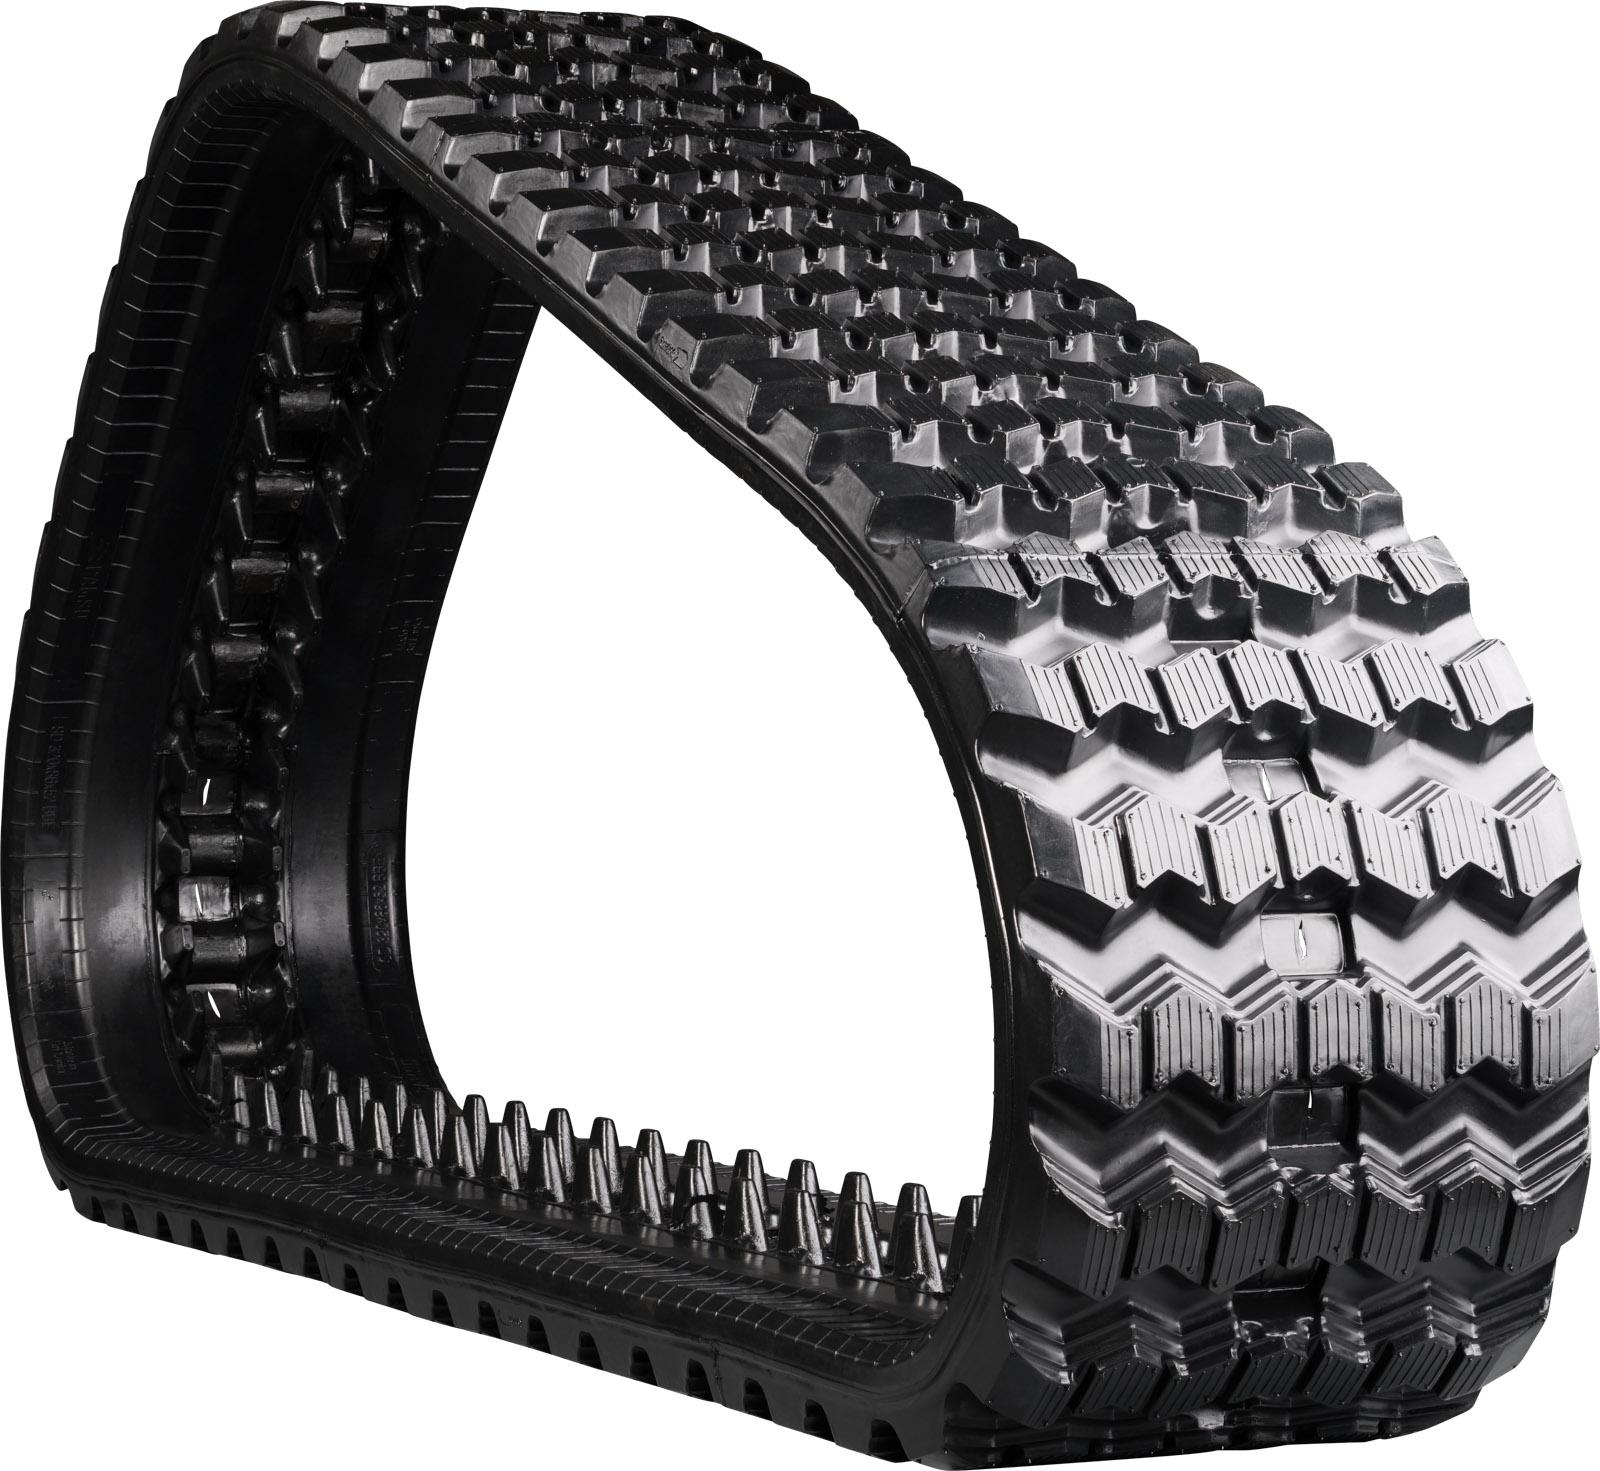 set of 2 13" camso heavy duty sawtooth pattern rubber track (320x86bx53)